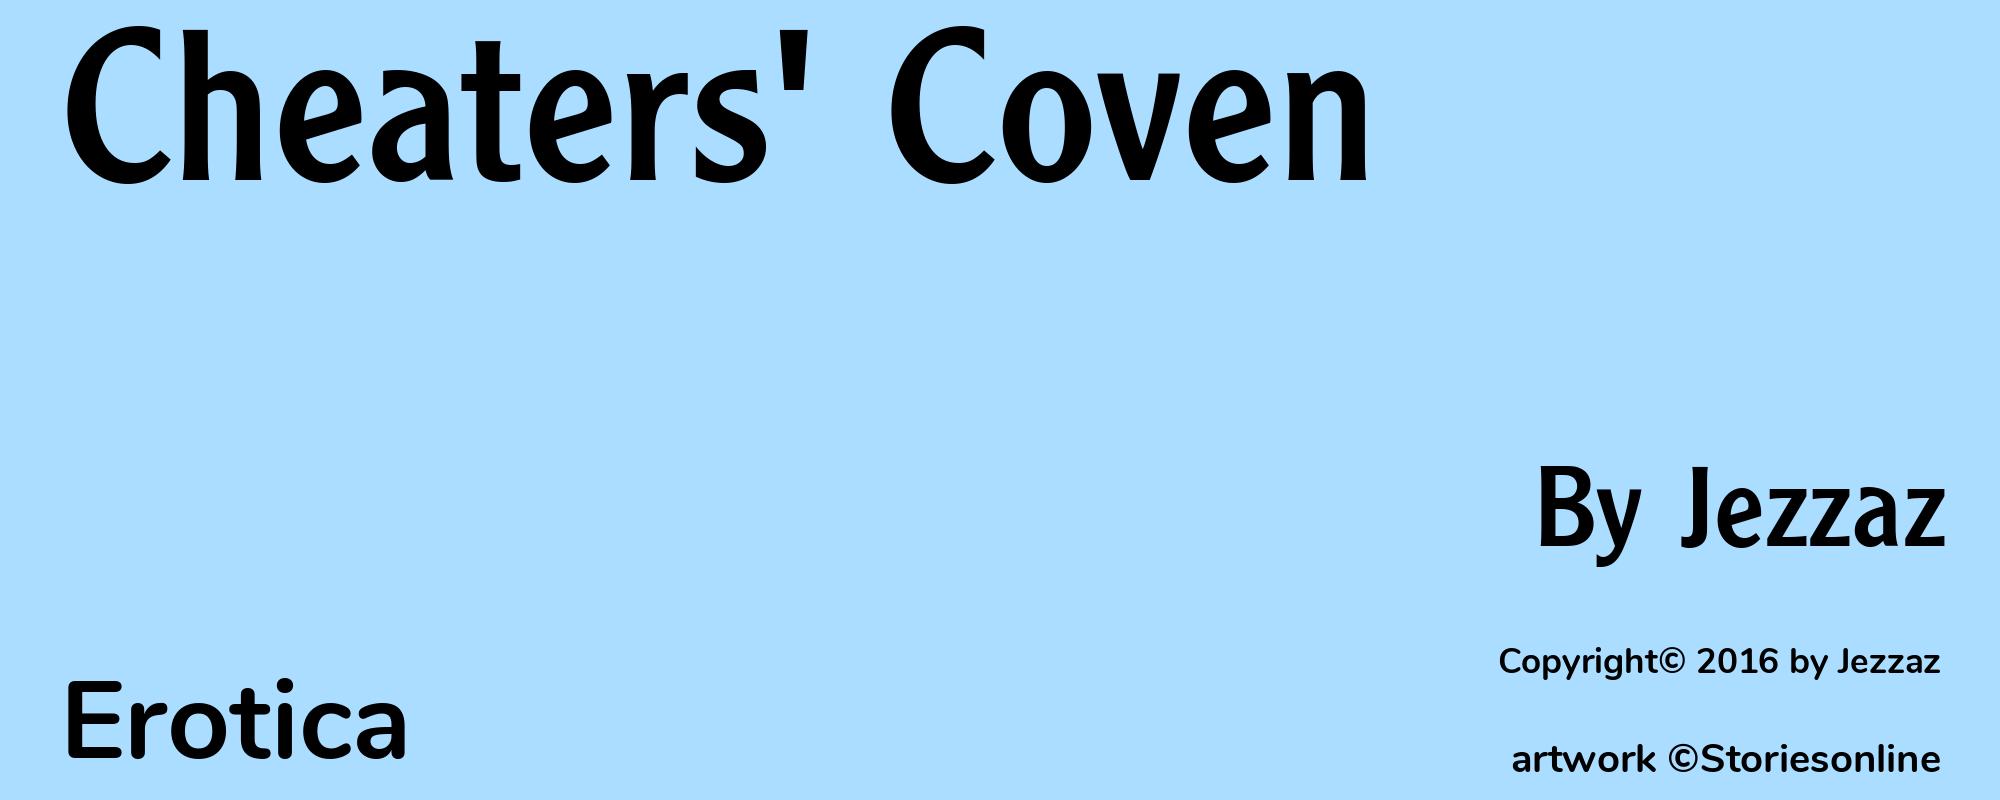 Cheaters' Coven - Cover